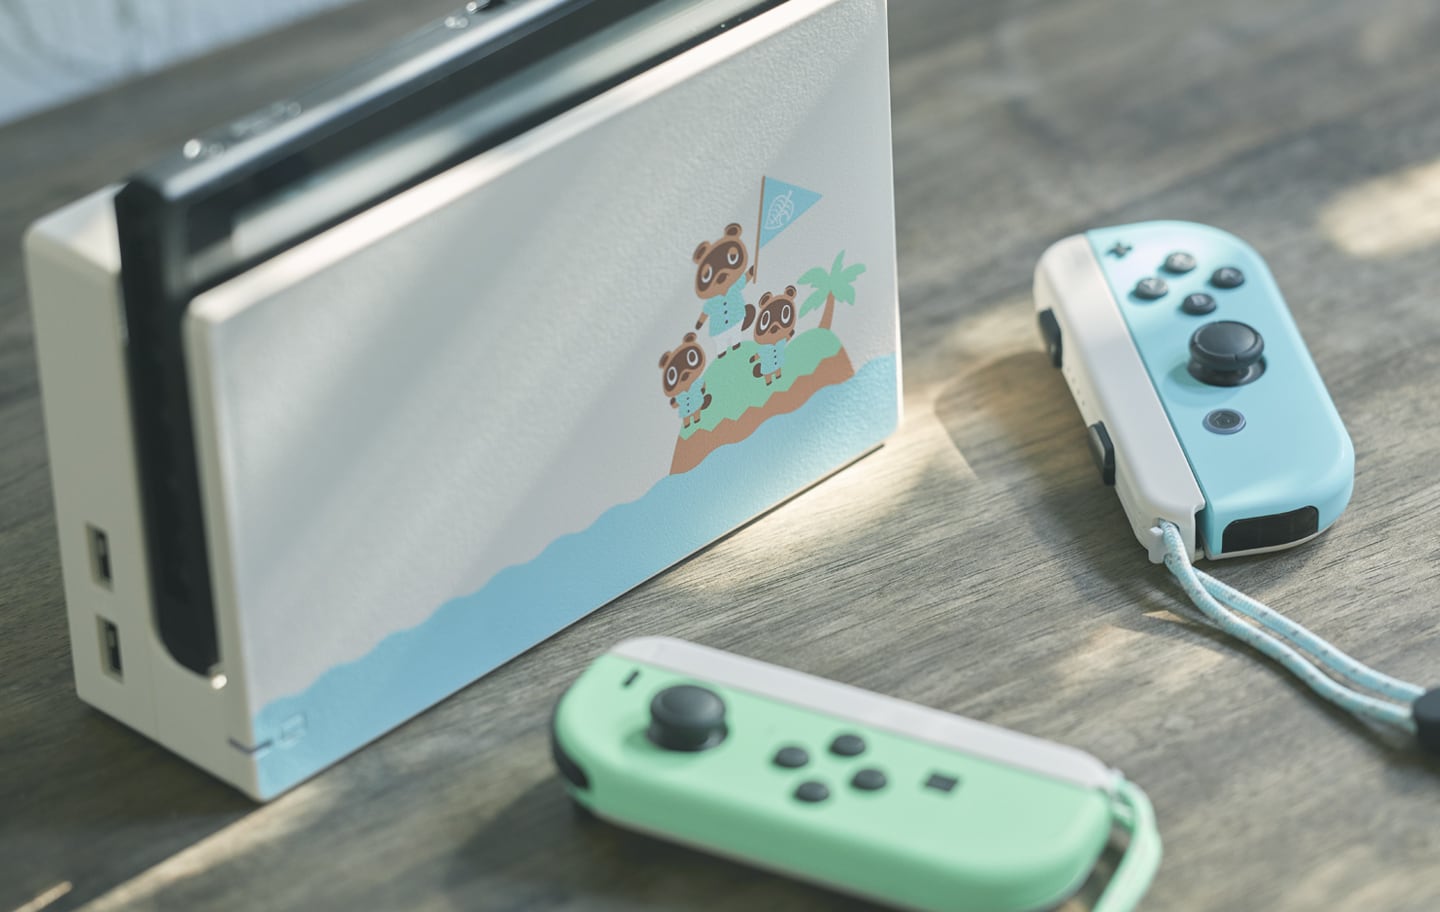 Japanese fans swept away by Nintendo's gorgeous new “Animal 